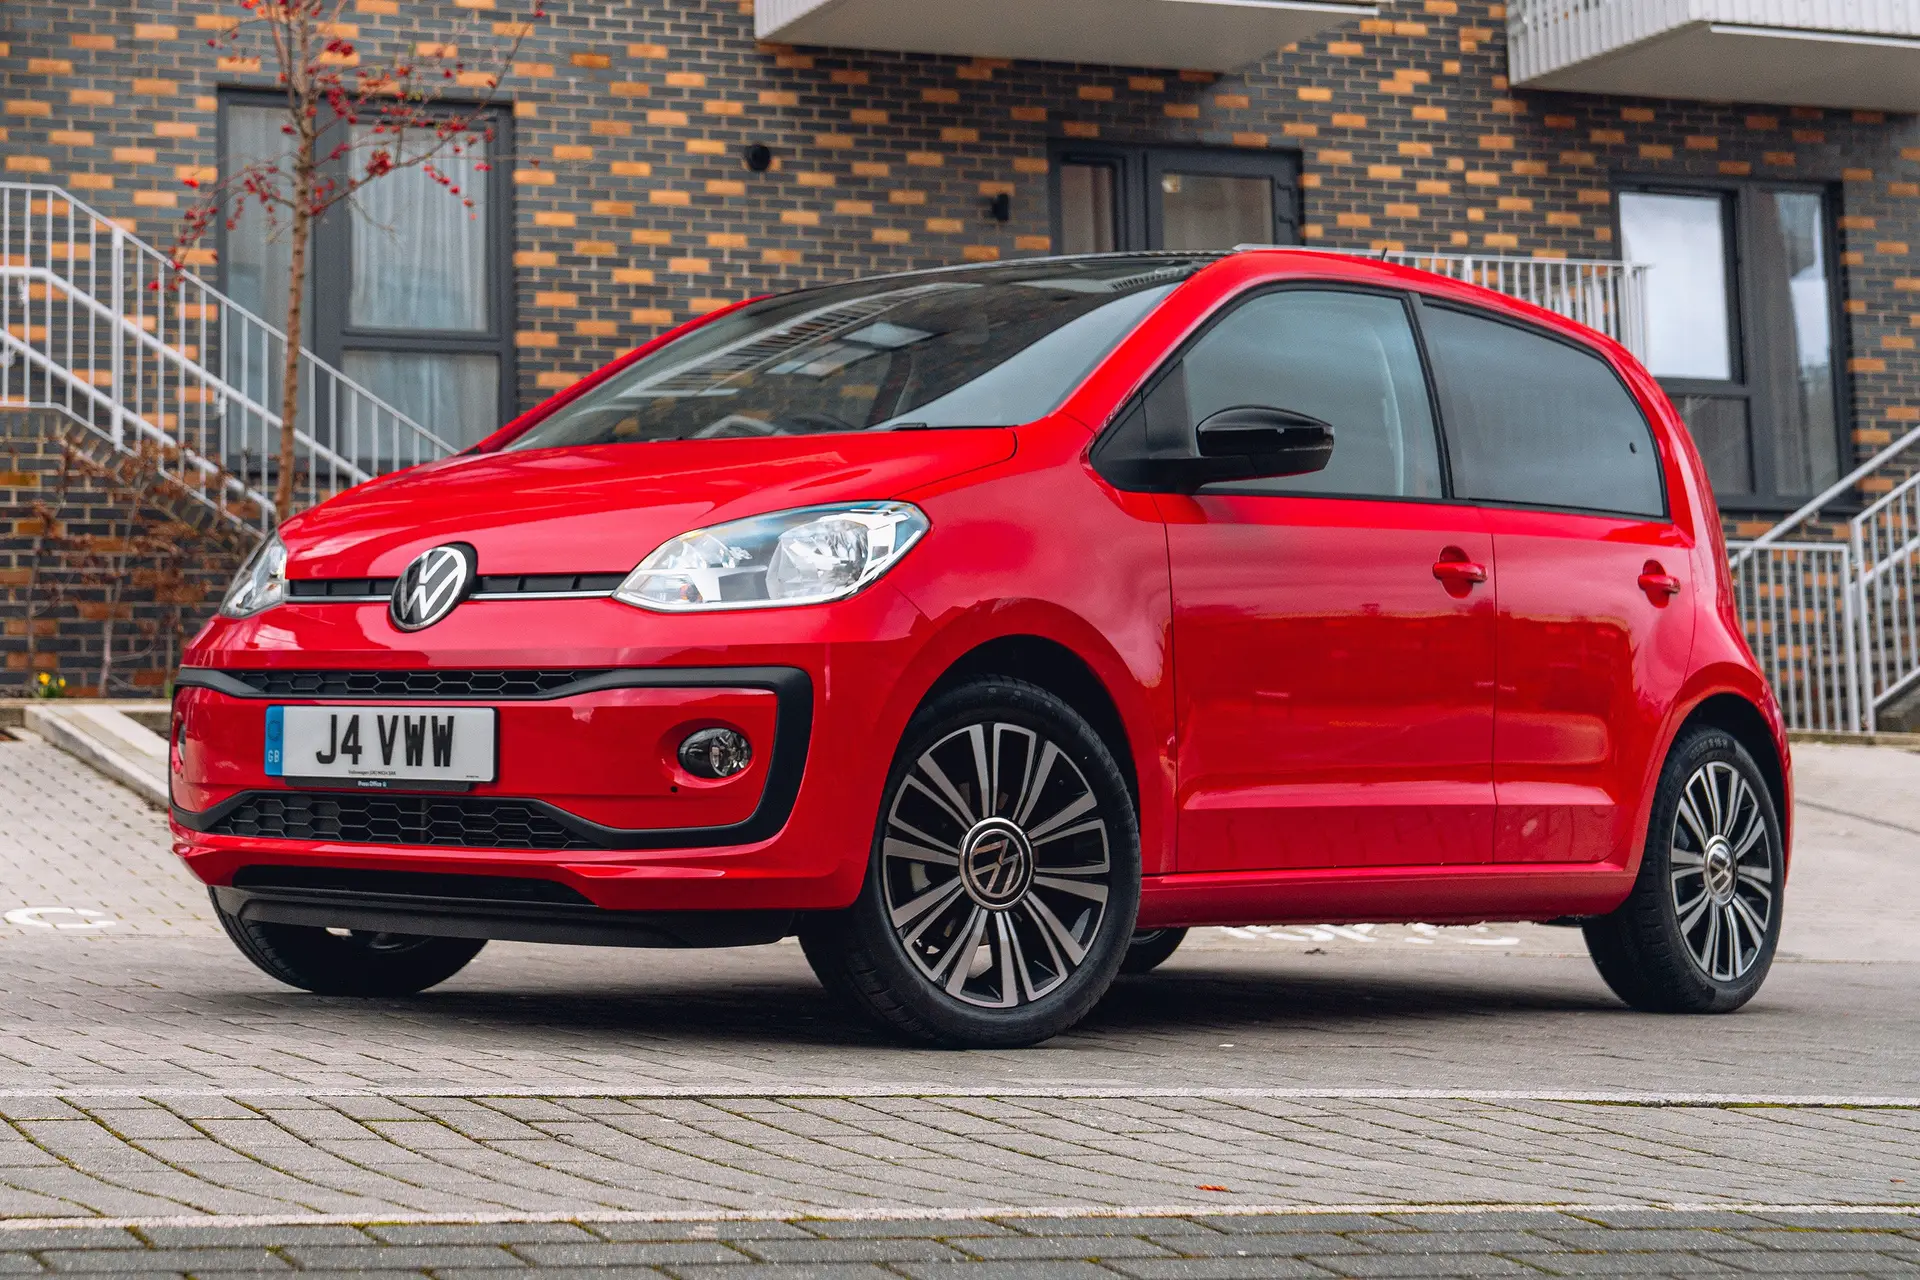 Volkswagen up! Production To End This Year: Official